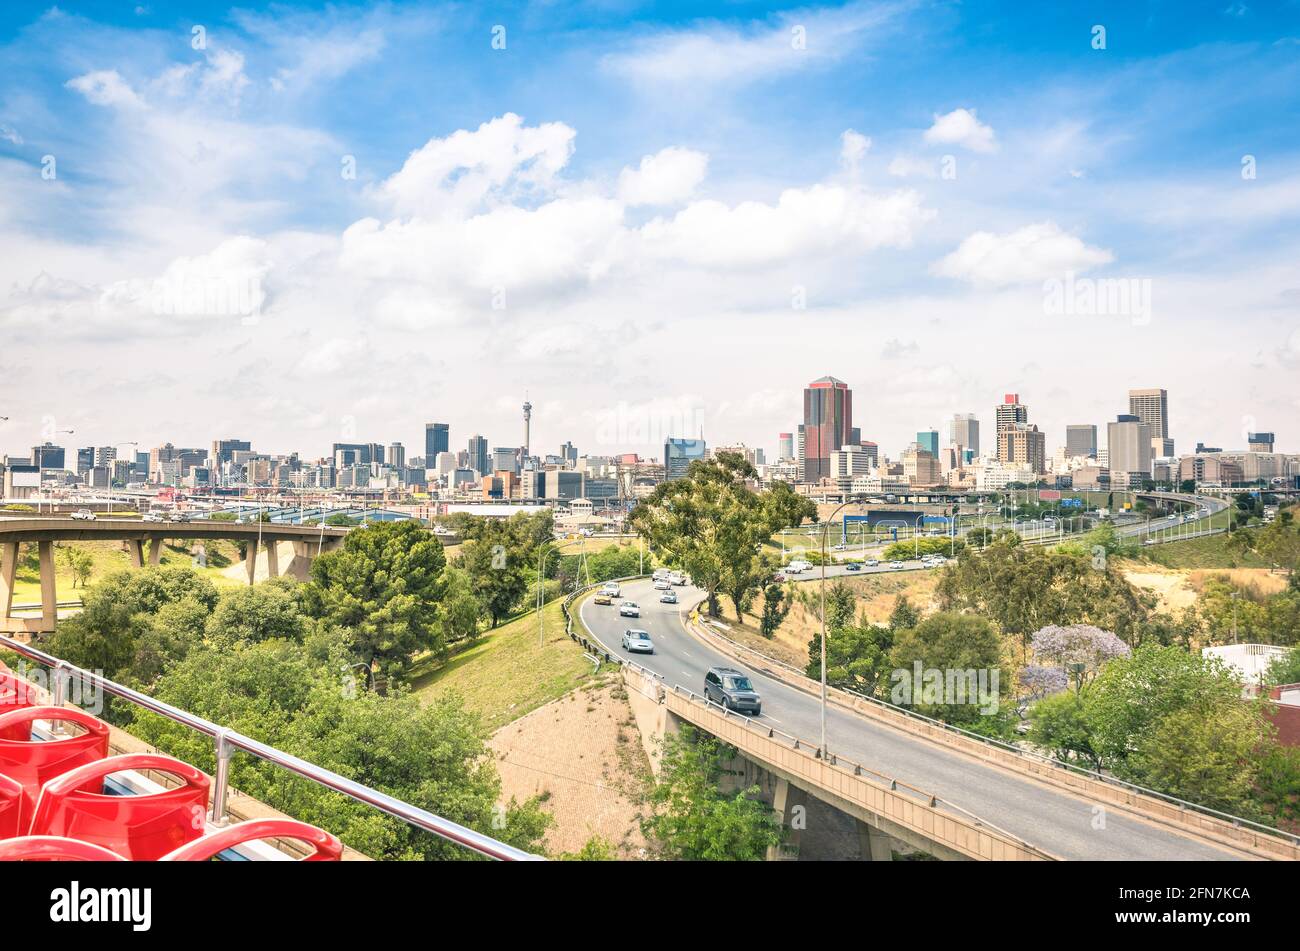 Wide angle view of Johannesburg skyline from the highways during a sightseeing tour around the urban area Stock Photo